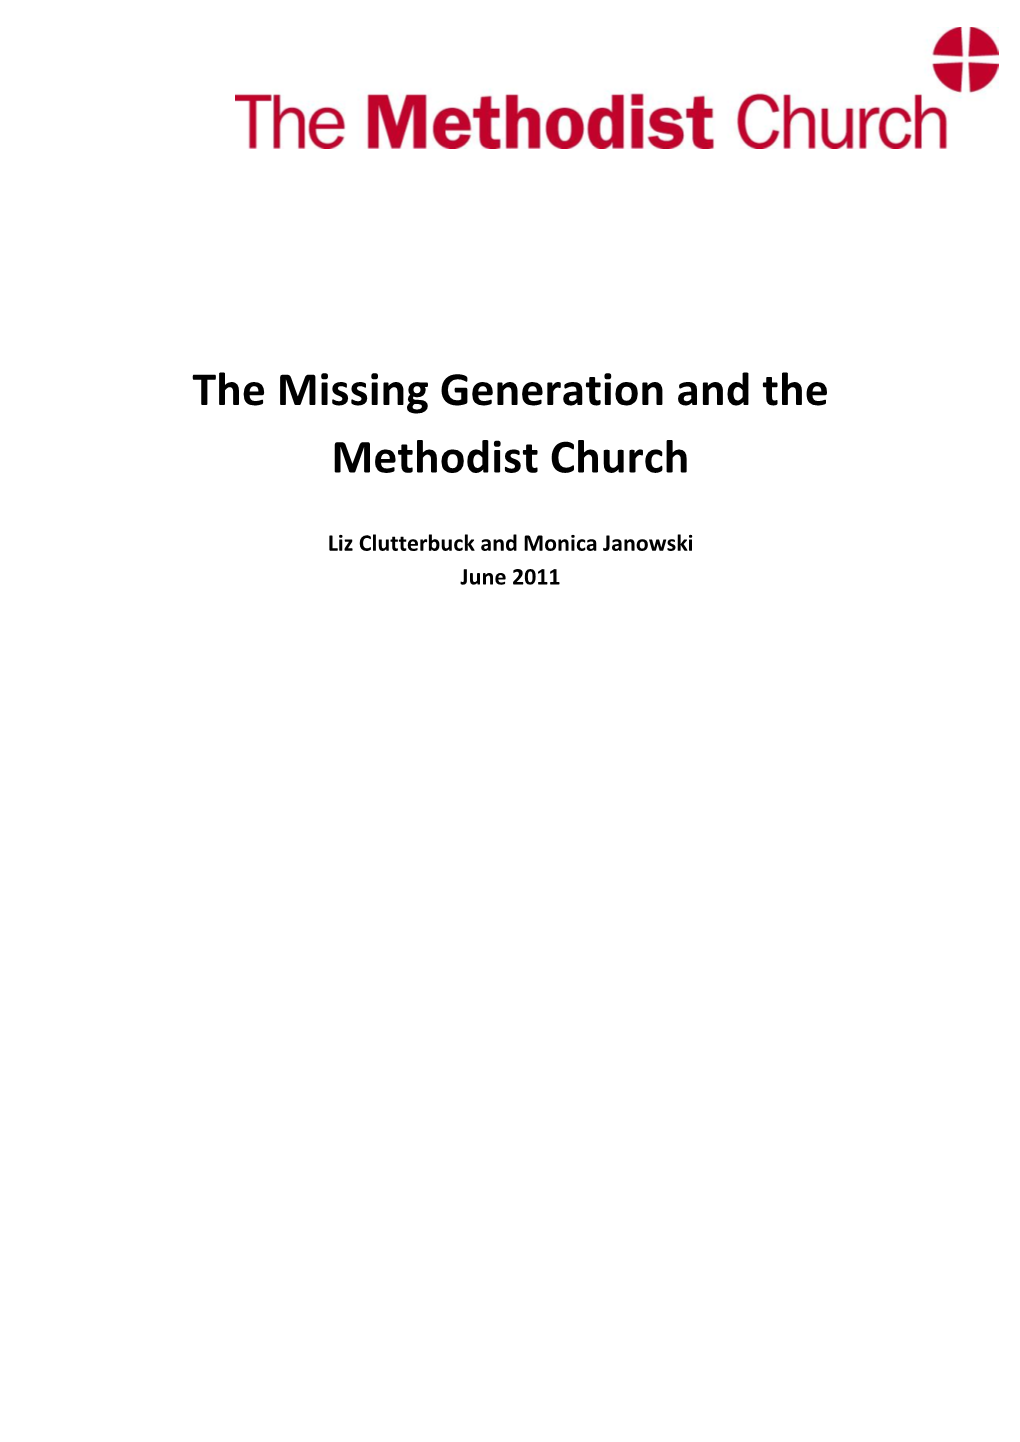 The Missing Generation and the Methodist Church